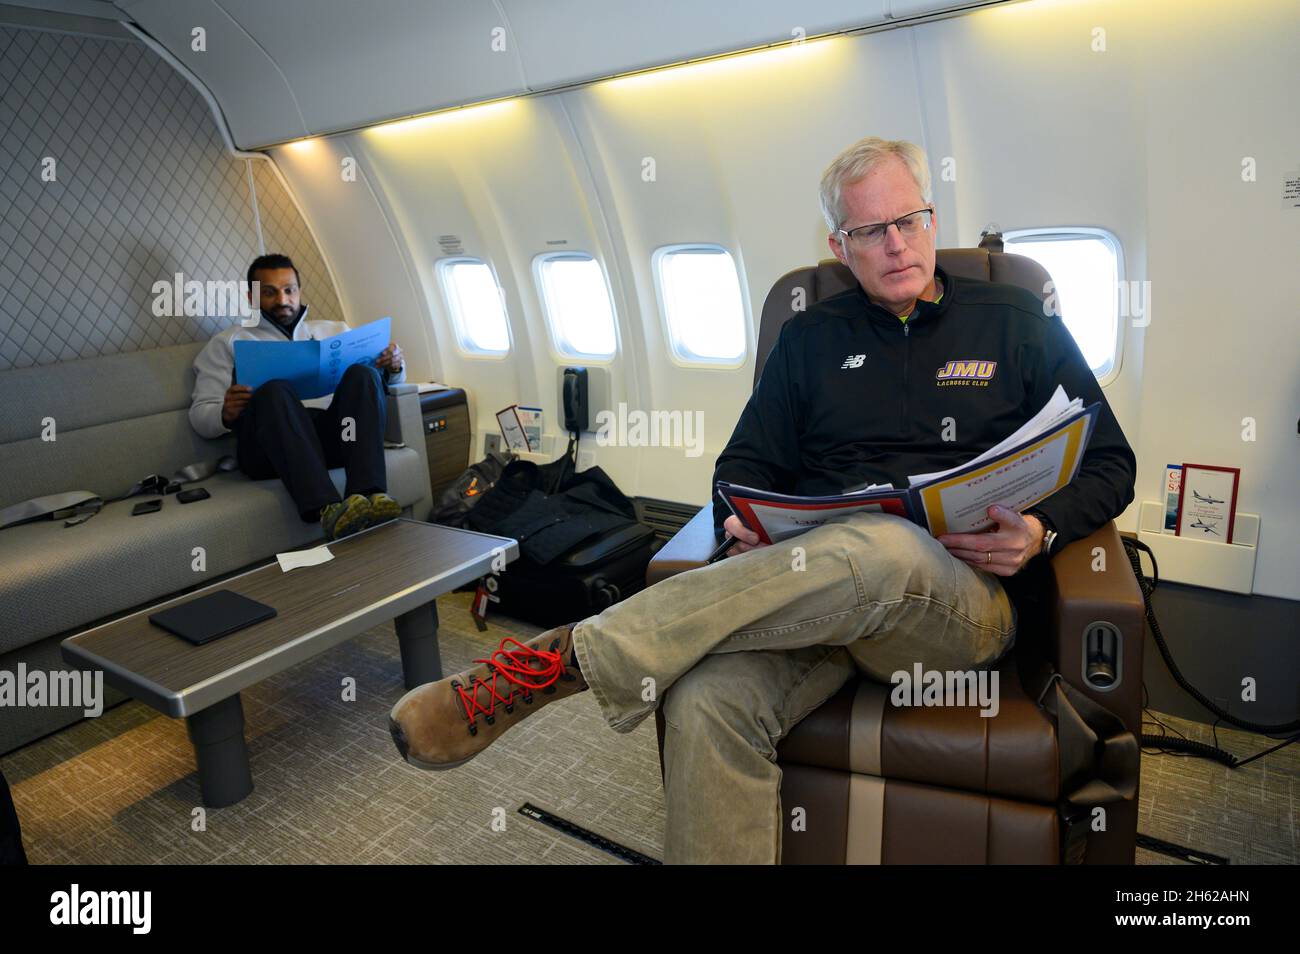 Reportage:  Acting Defense Secretary Chris Miller works in the aircraft cabin with Chief of Staff Kash Patel, after departing Peterson Air Force Base, Colo., Jan. 14, 2021. Stock Photo